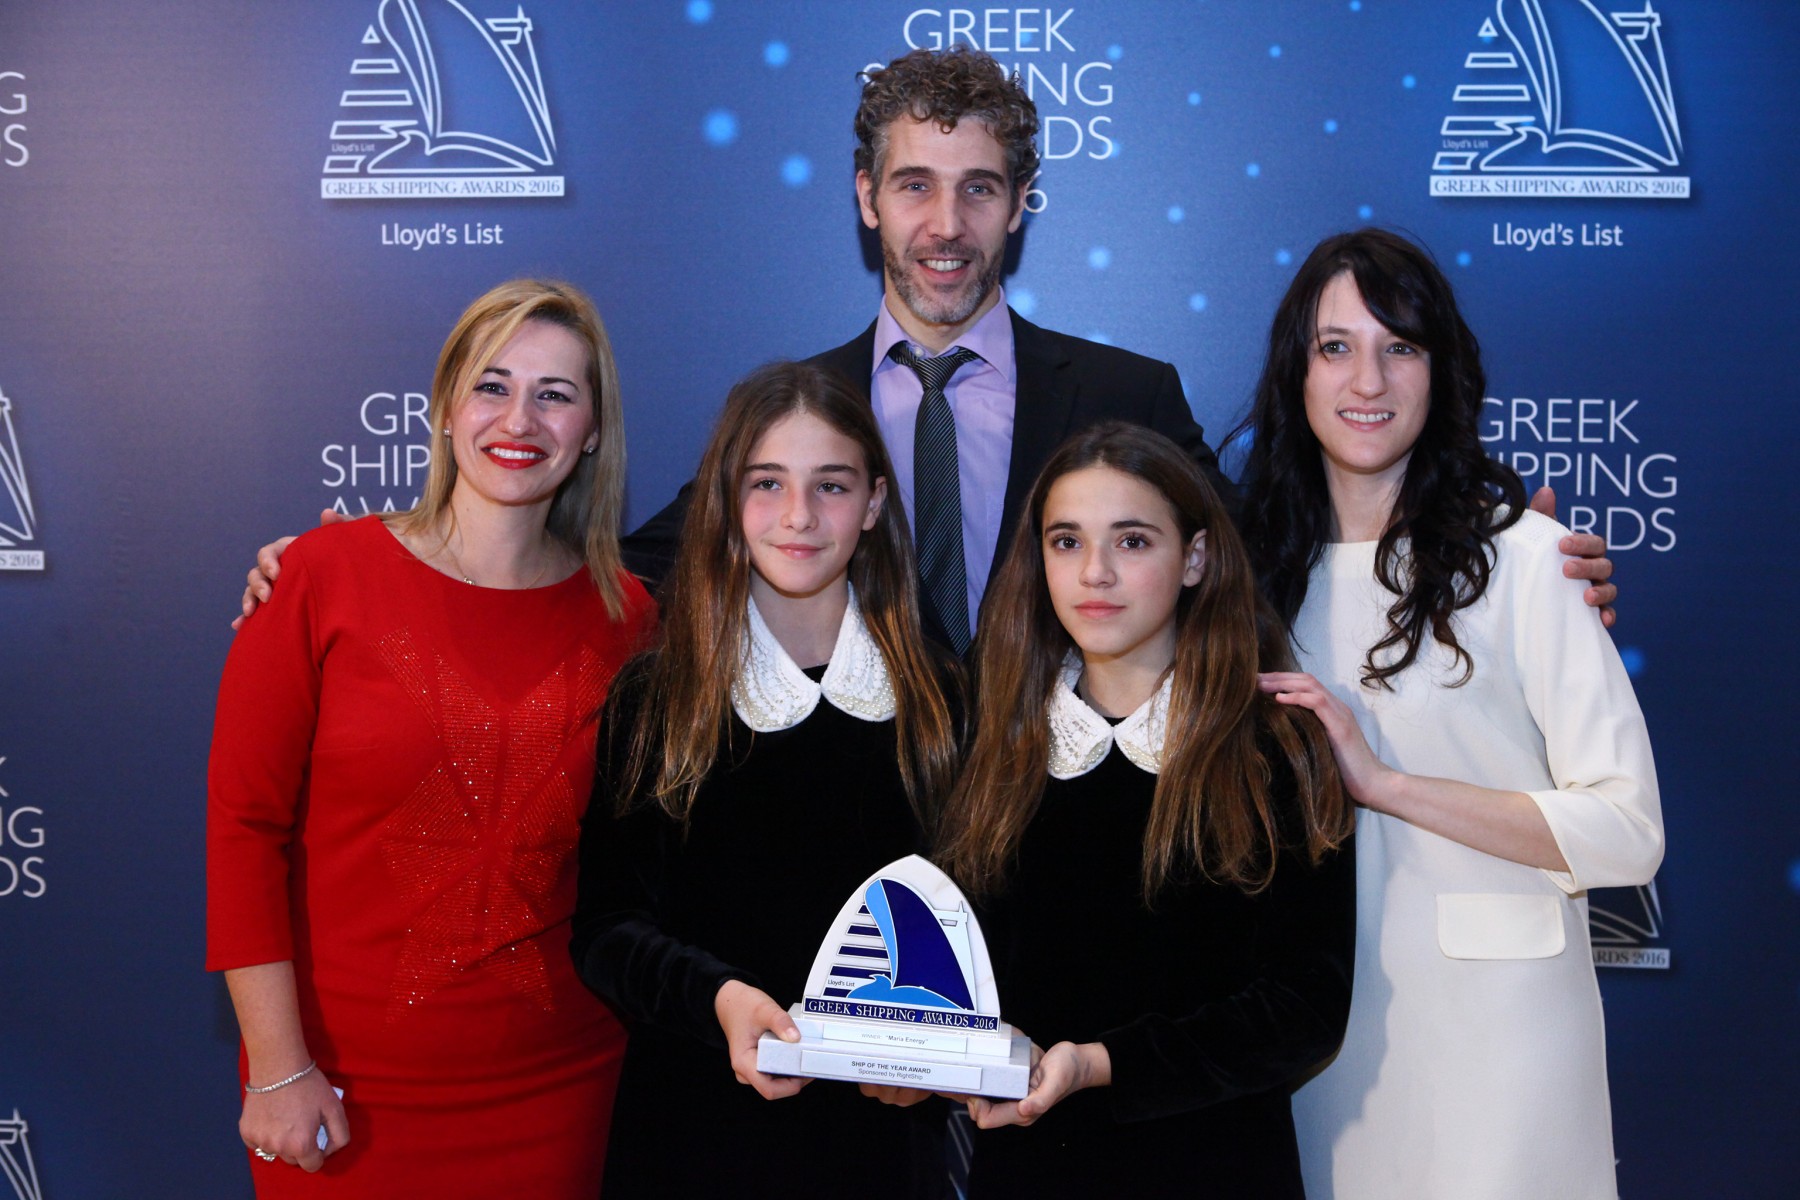 Mr. Mathieu Antin (centre) of sponsor RightShip with Ms. Vanessa Florou, Irini and Elisavet Tsakos and Ms. Alexia Papageorgiou accepting the Ship of the Year Award for “Maria Energy”.